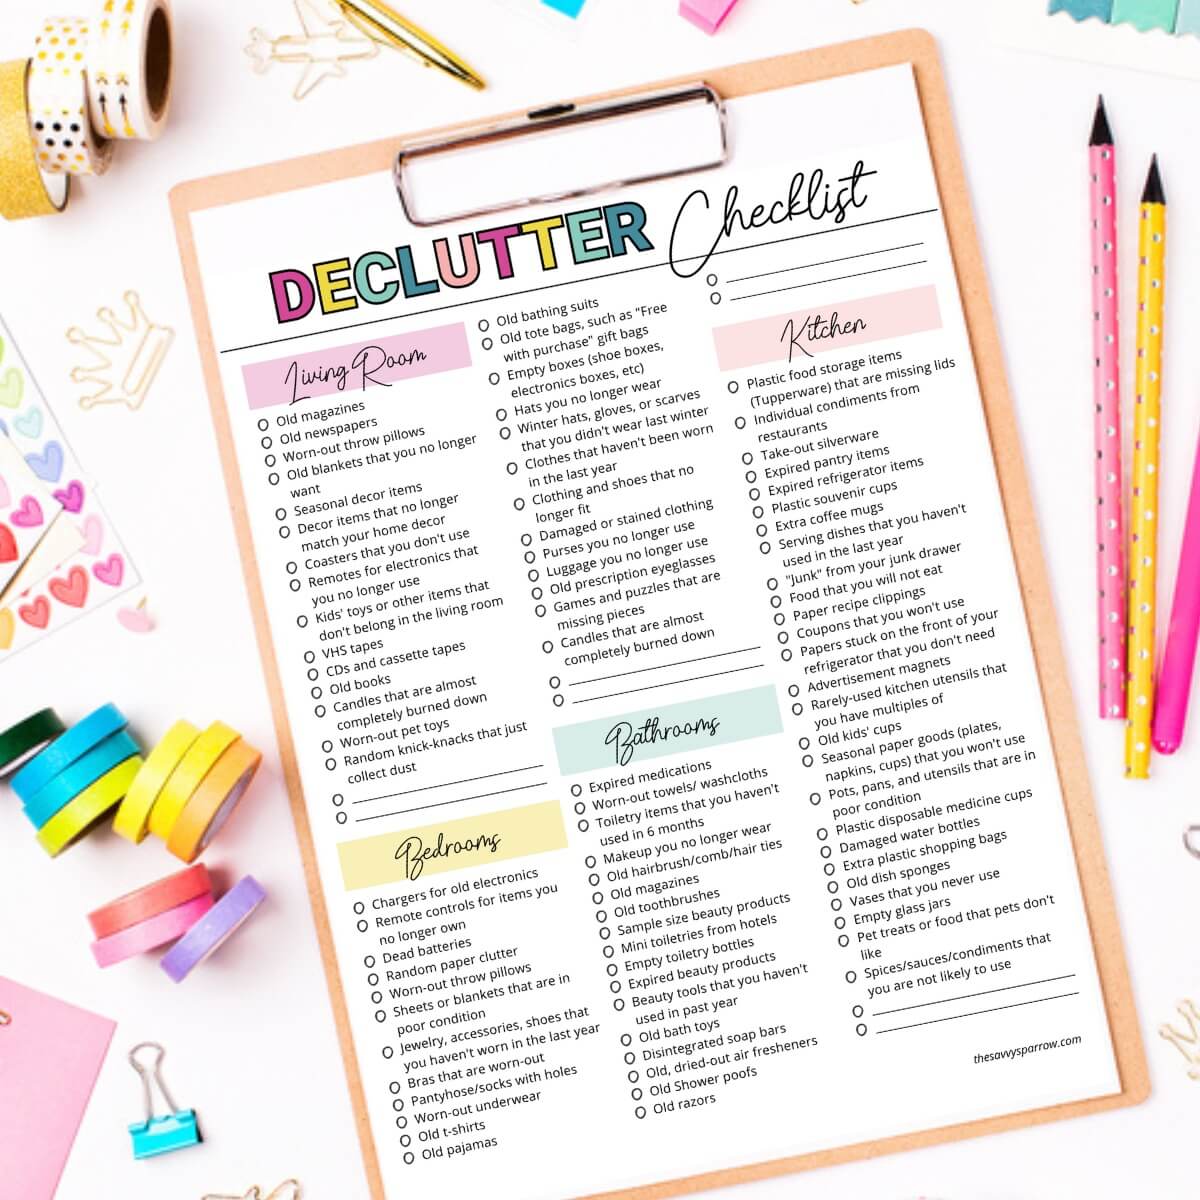 100+ Easy Things To Get Rid of Today: Declutter Your Life - Organizing Moms